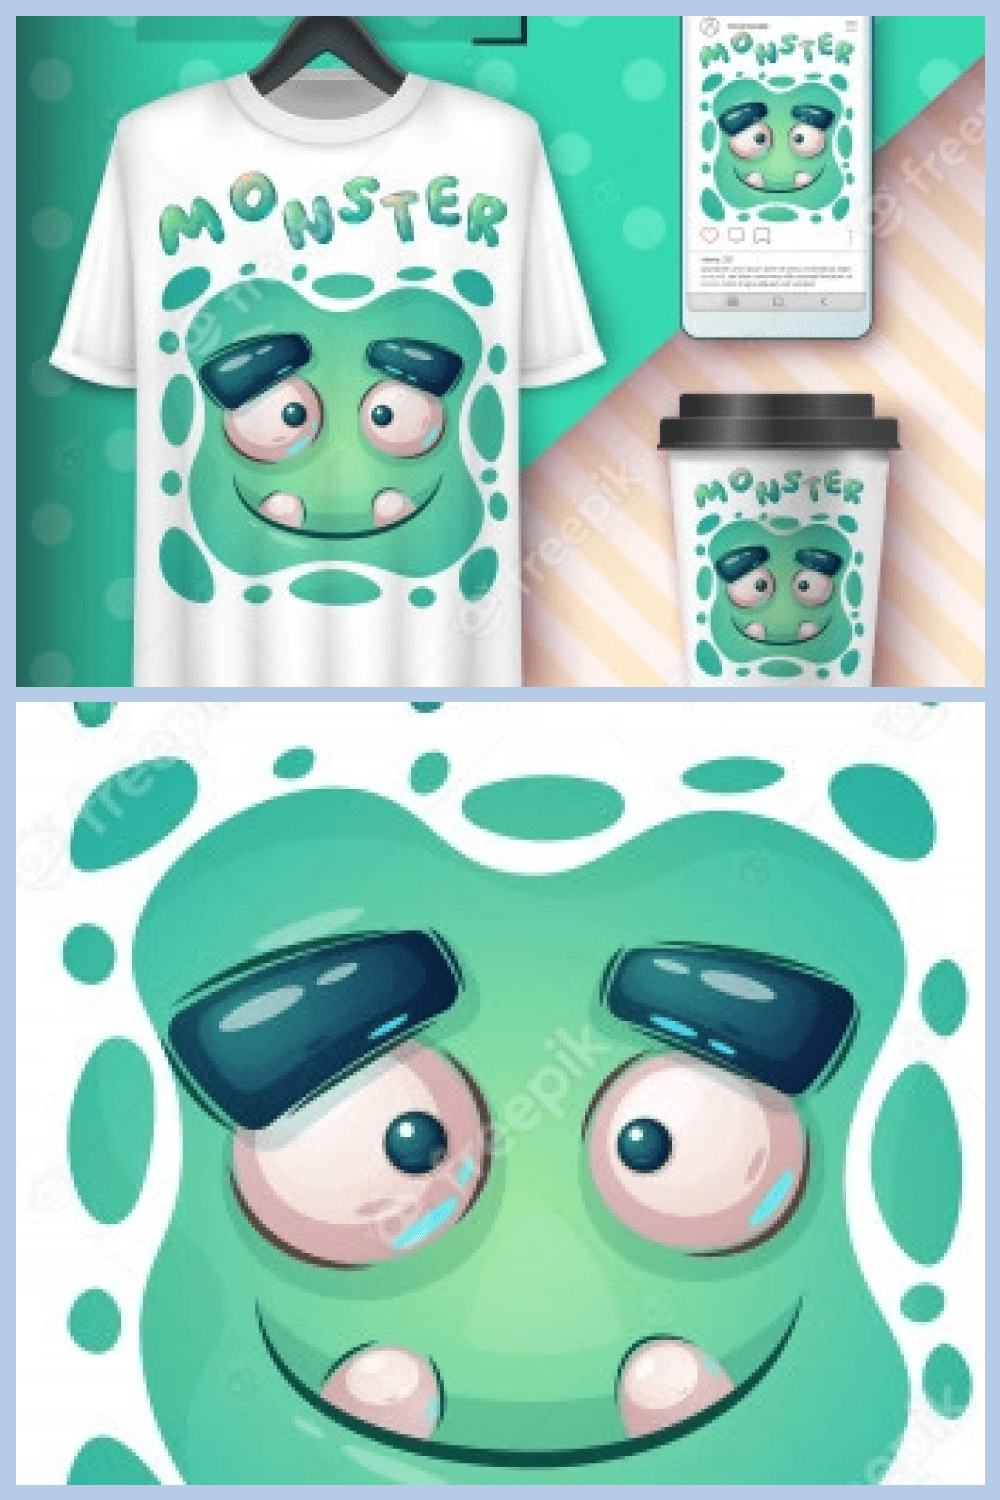 This cute green spot on your T-shirt will not leave you unnoticed.